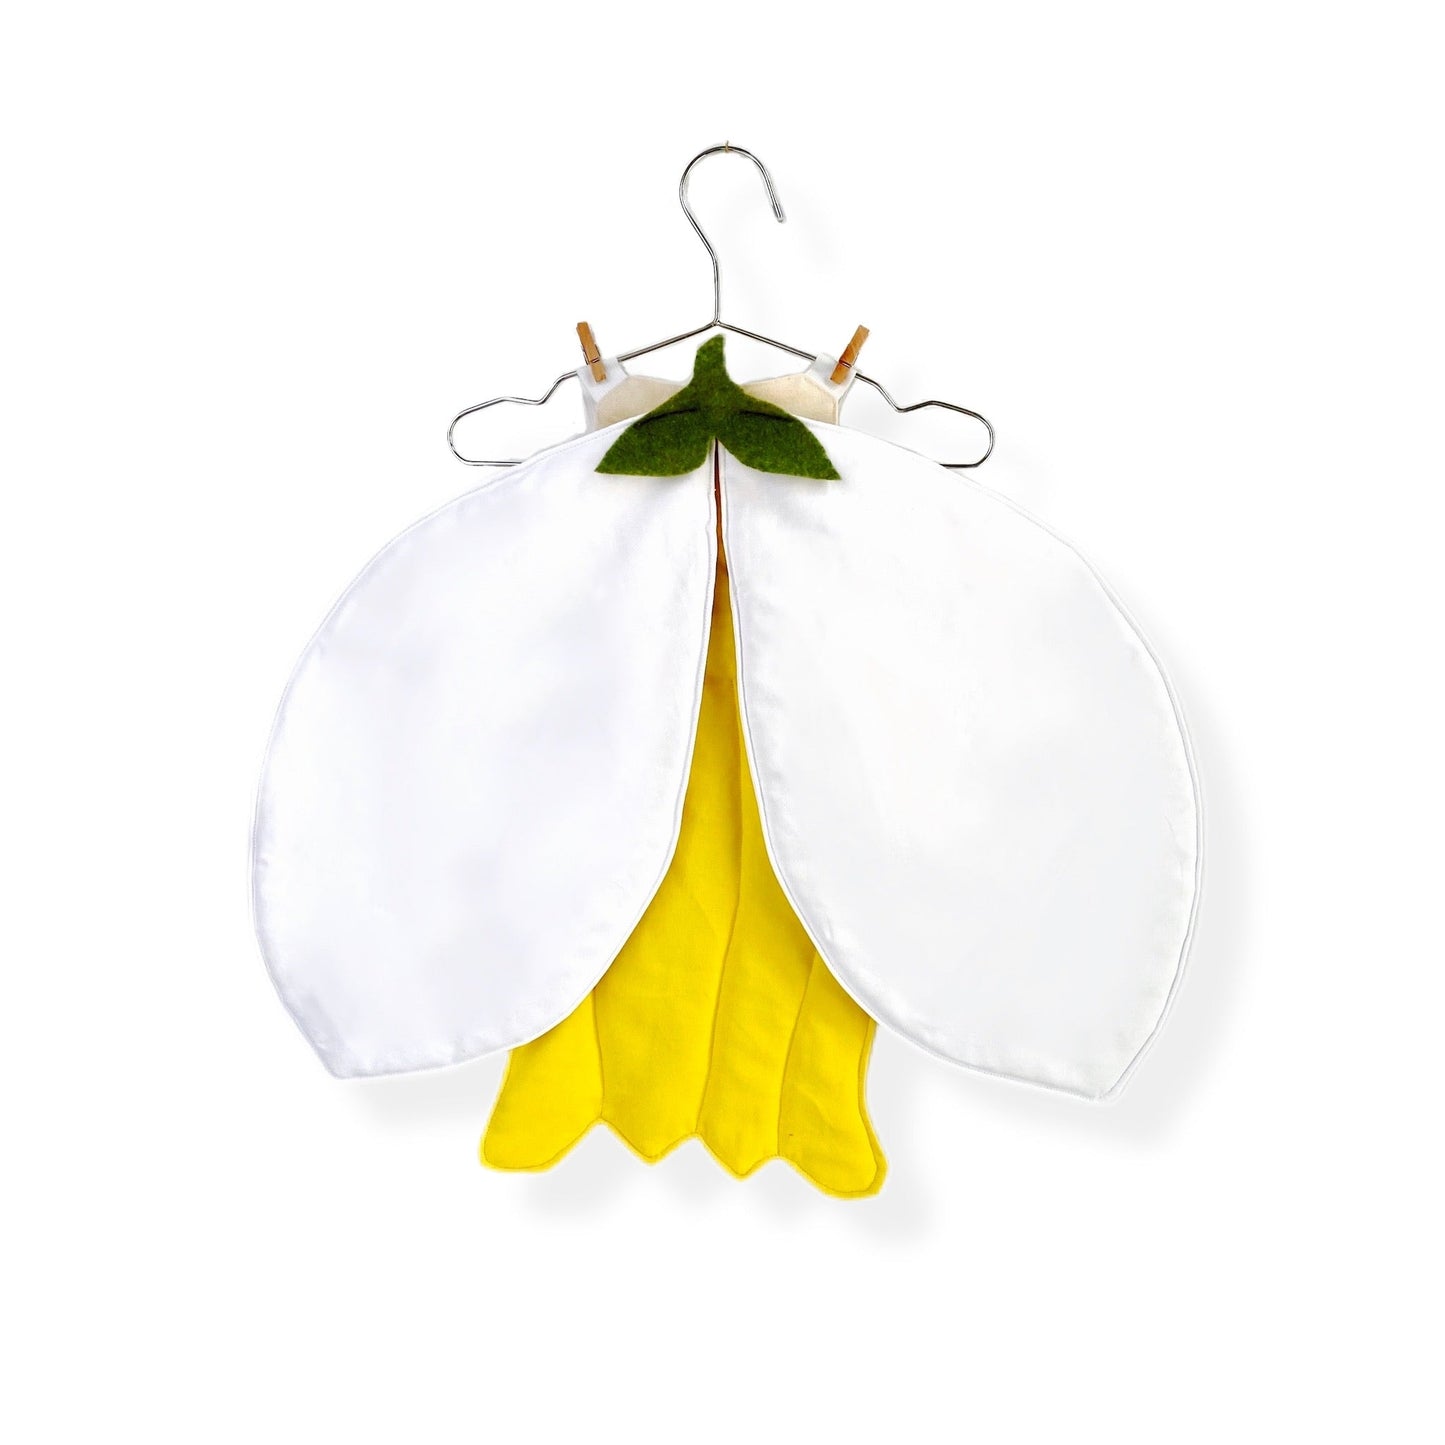 Flower costume wings for kids and toddler pretend play.